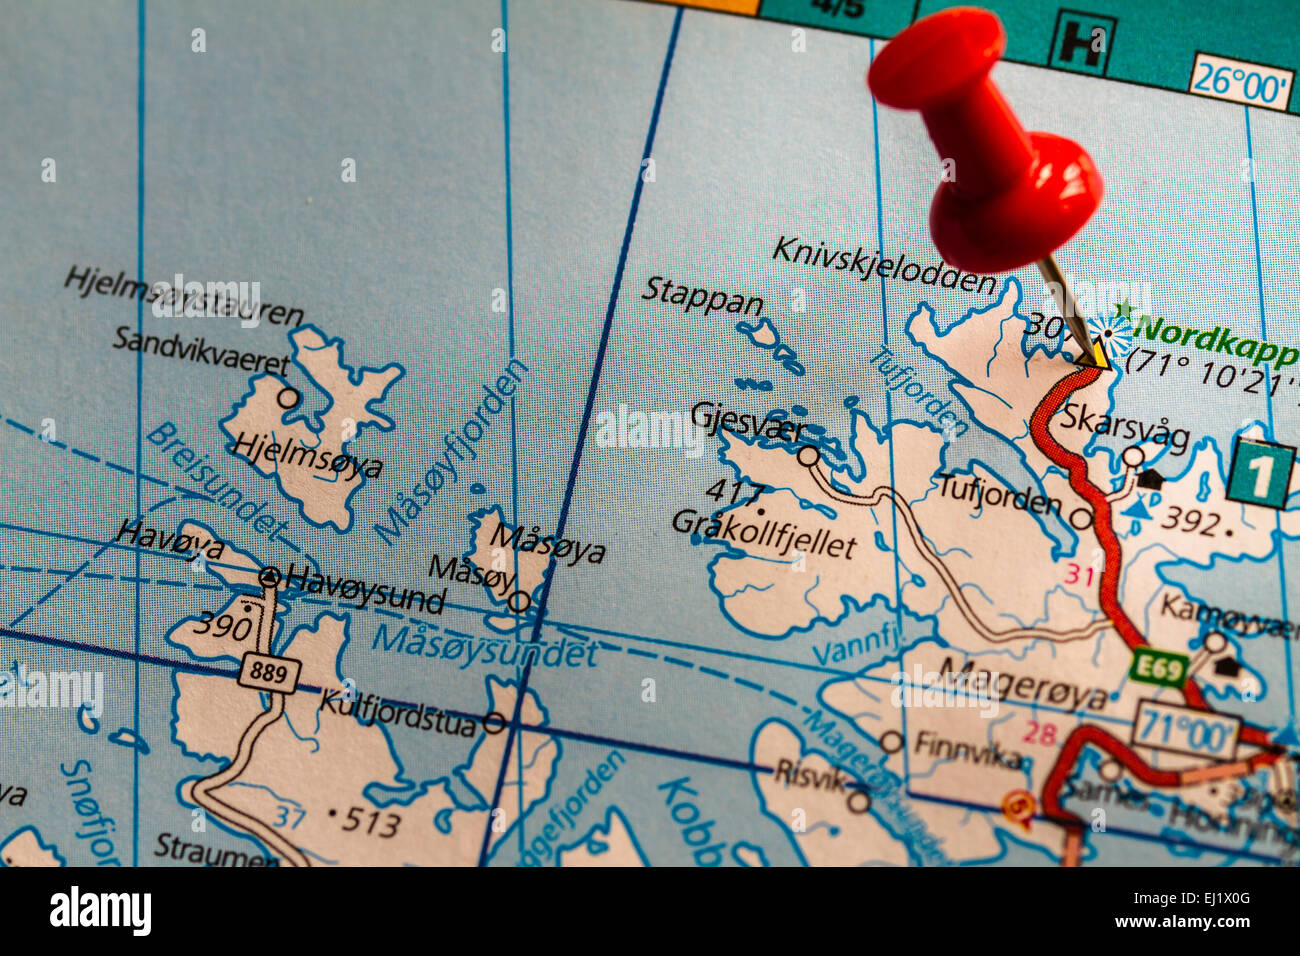 A red pushpointer pointing at Nordkapp. Stock Photo